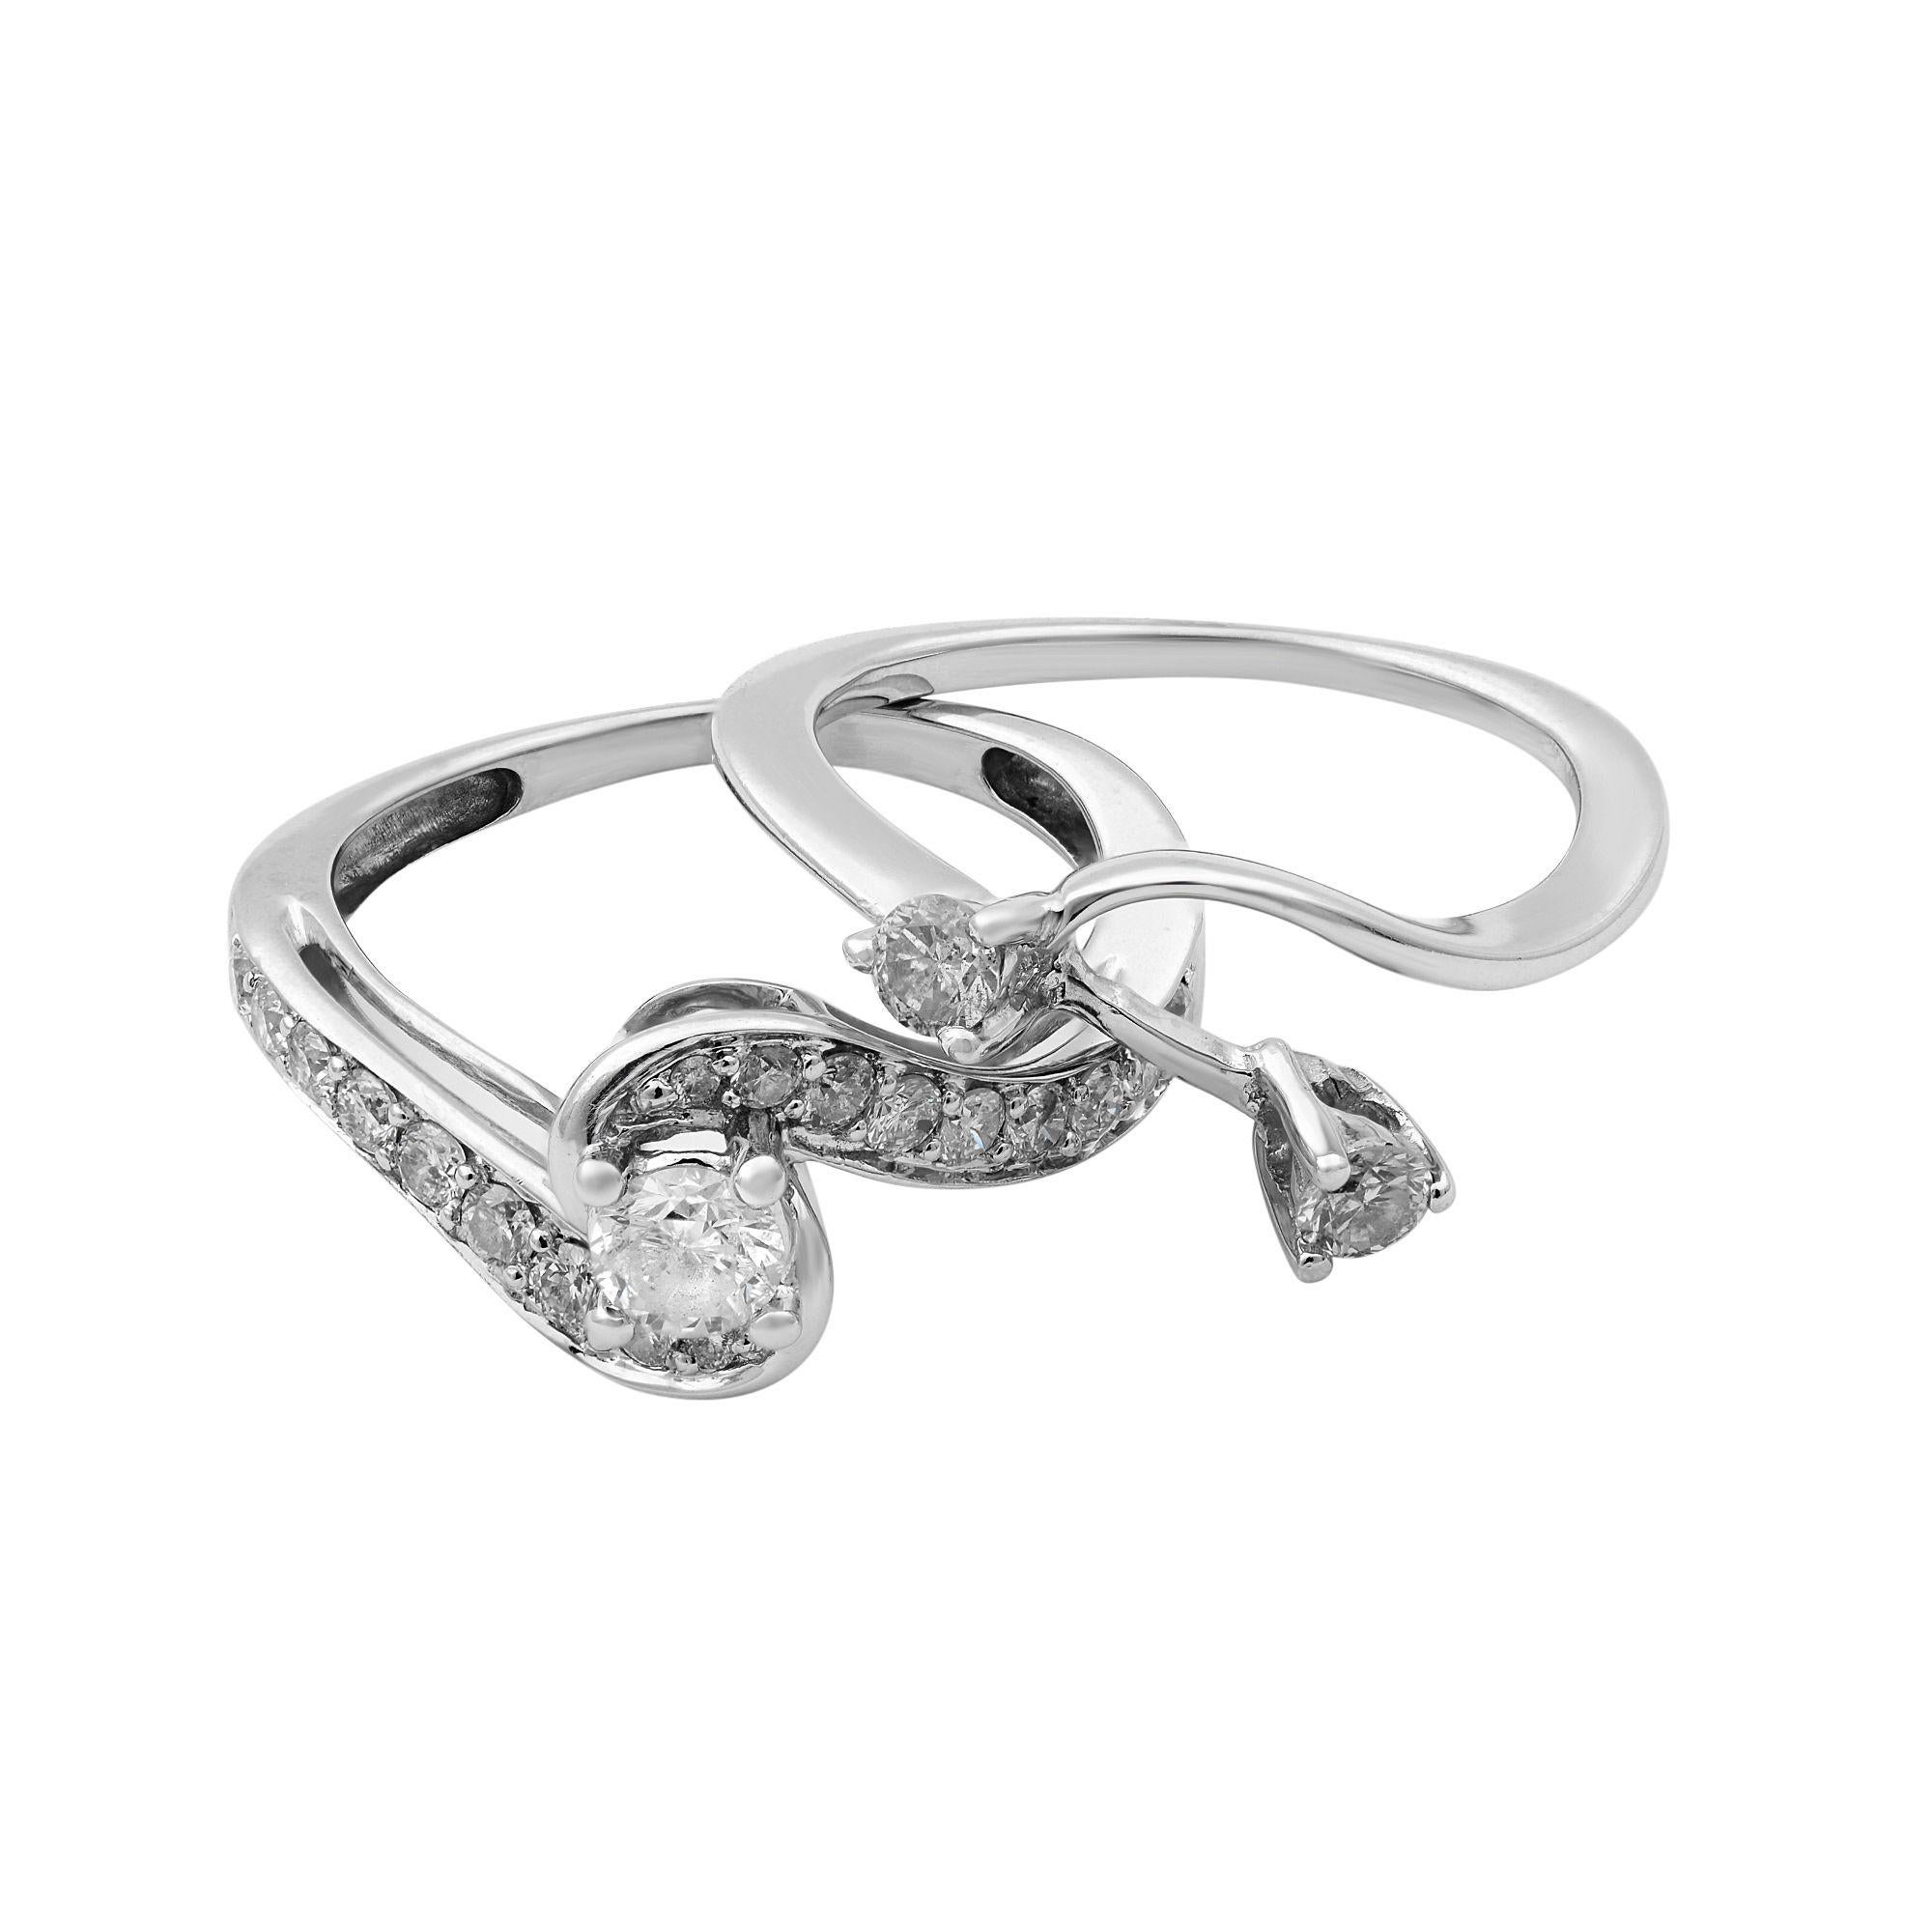 Rachel Koen Diamond Two Piece Ring Set 14K White Gold 0.60Cttw In New Condition For Sale In New York, NY